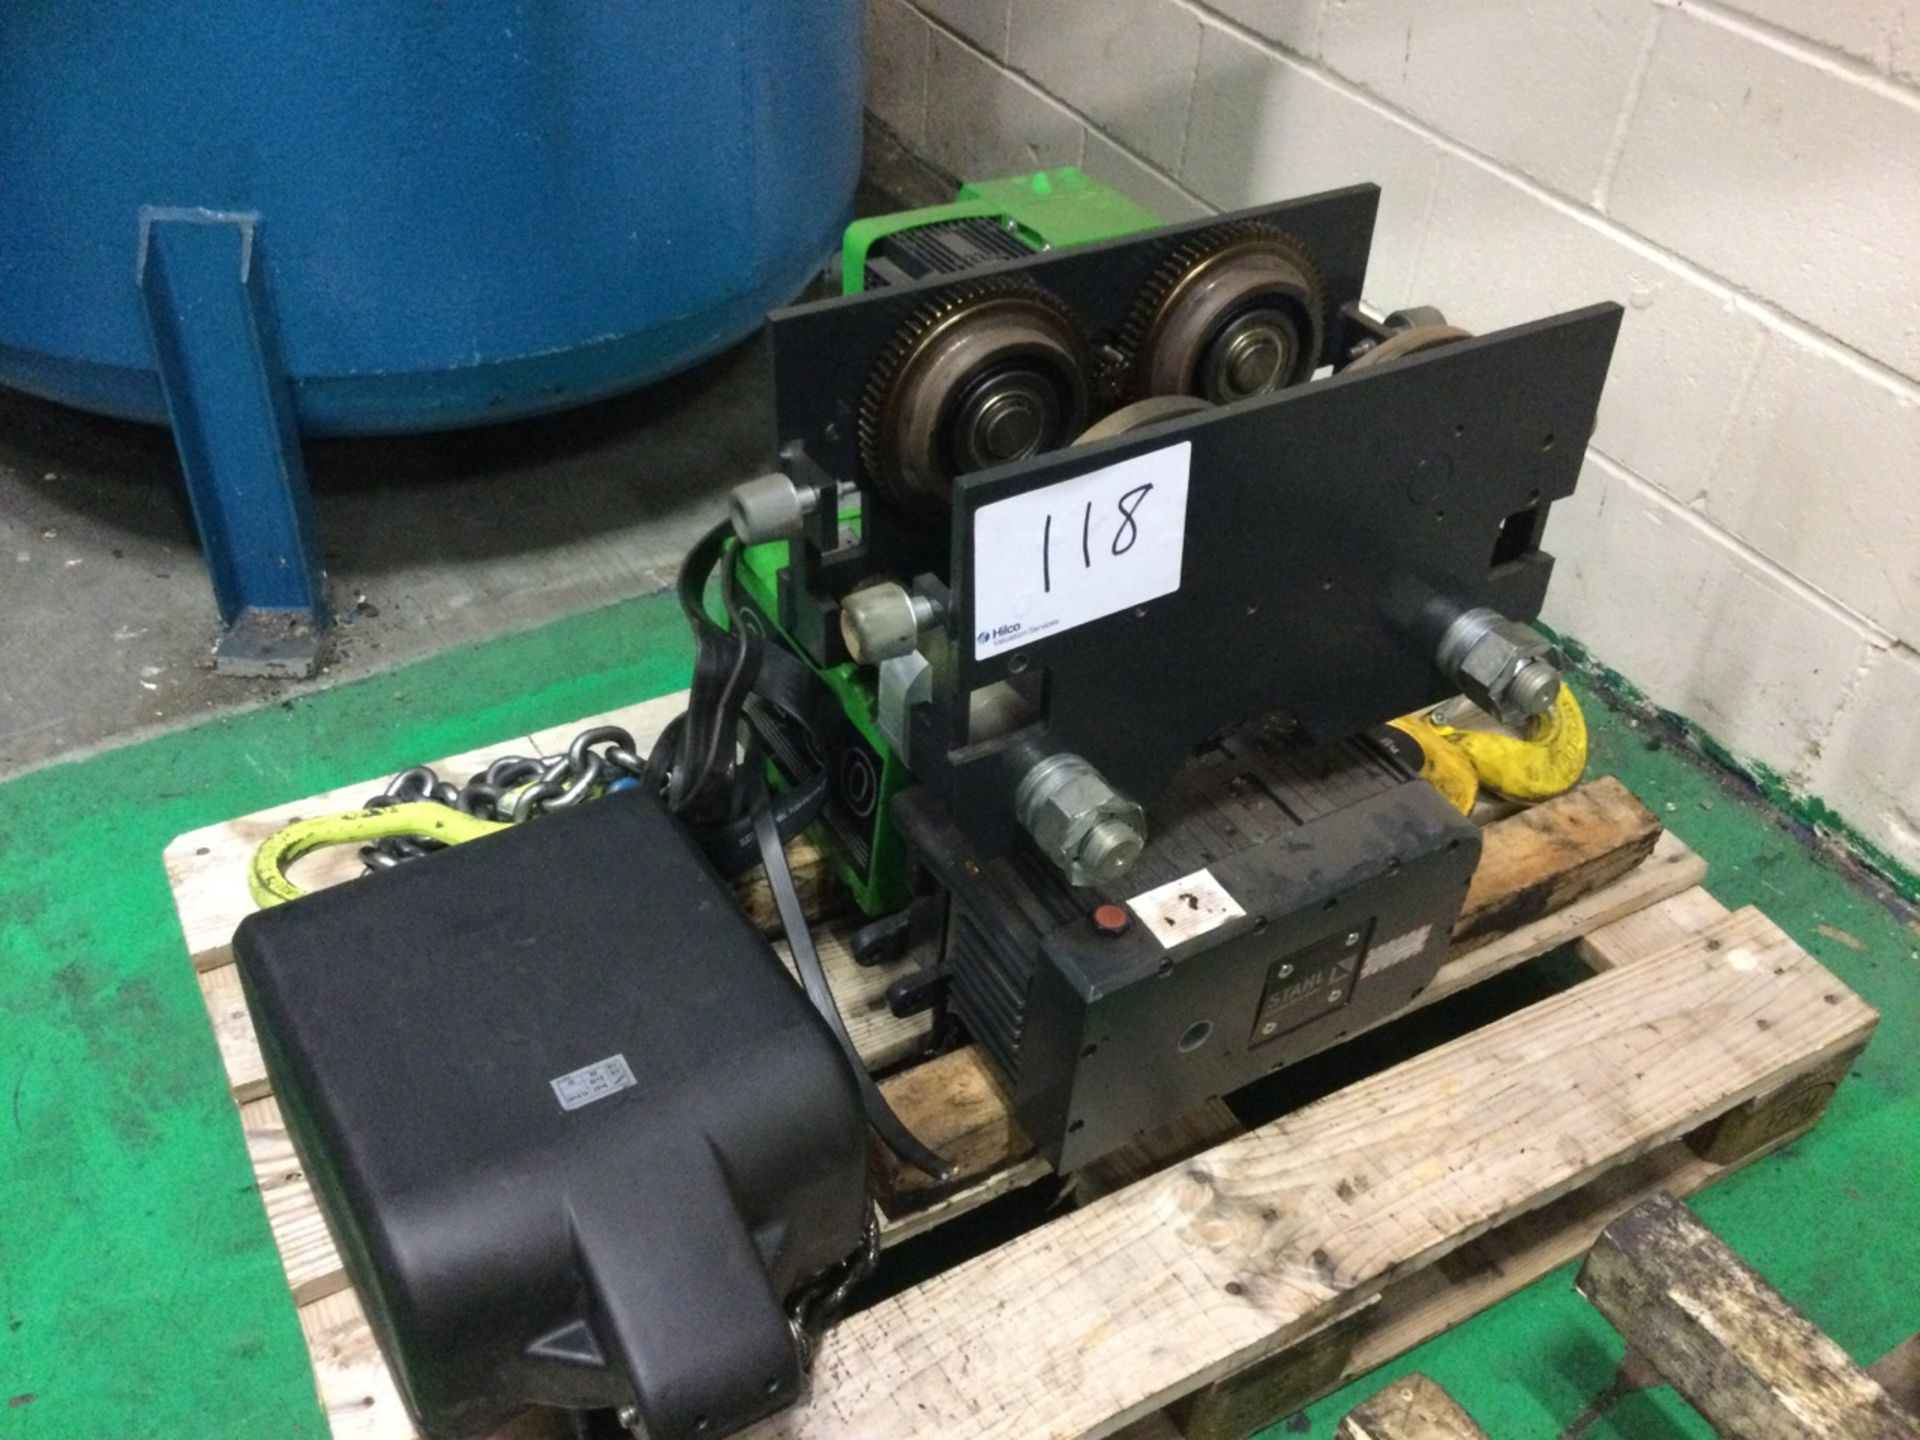 1 Stahl, ST50, Electric Chain Hoist, 5 Tonne Rated Capacity(Removed From Overhead Crane And On A Pa - Image 2 of 2